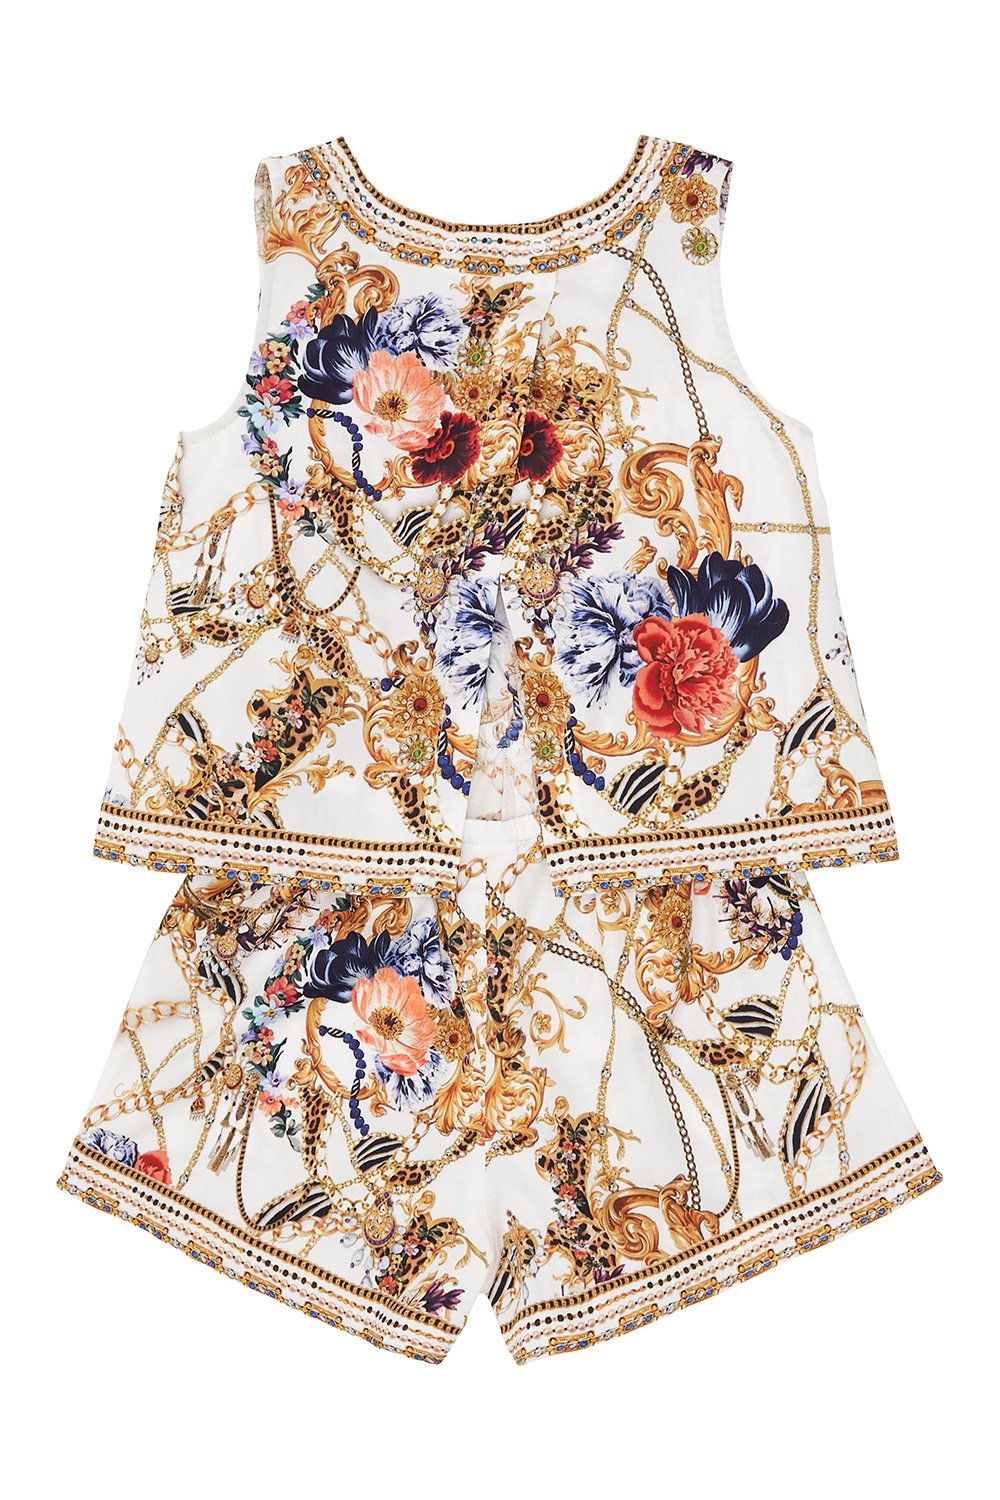 KIDS DOUBLE LAYER PLAYSUIT 12-14 REIGN SUPREME